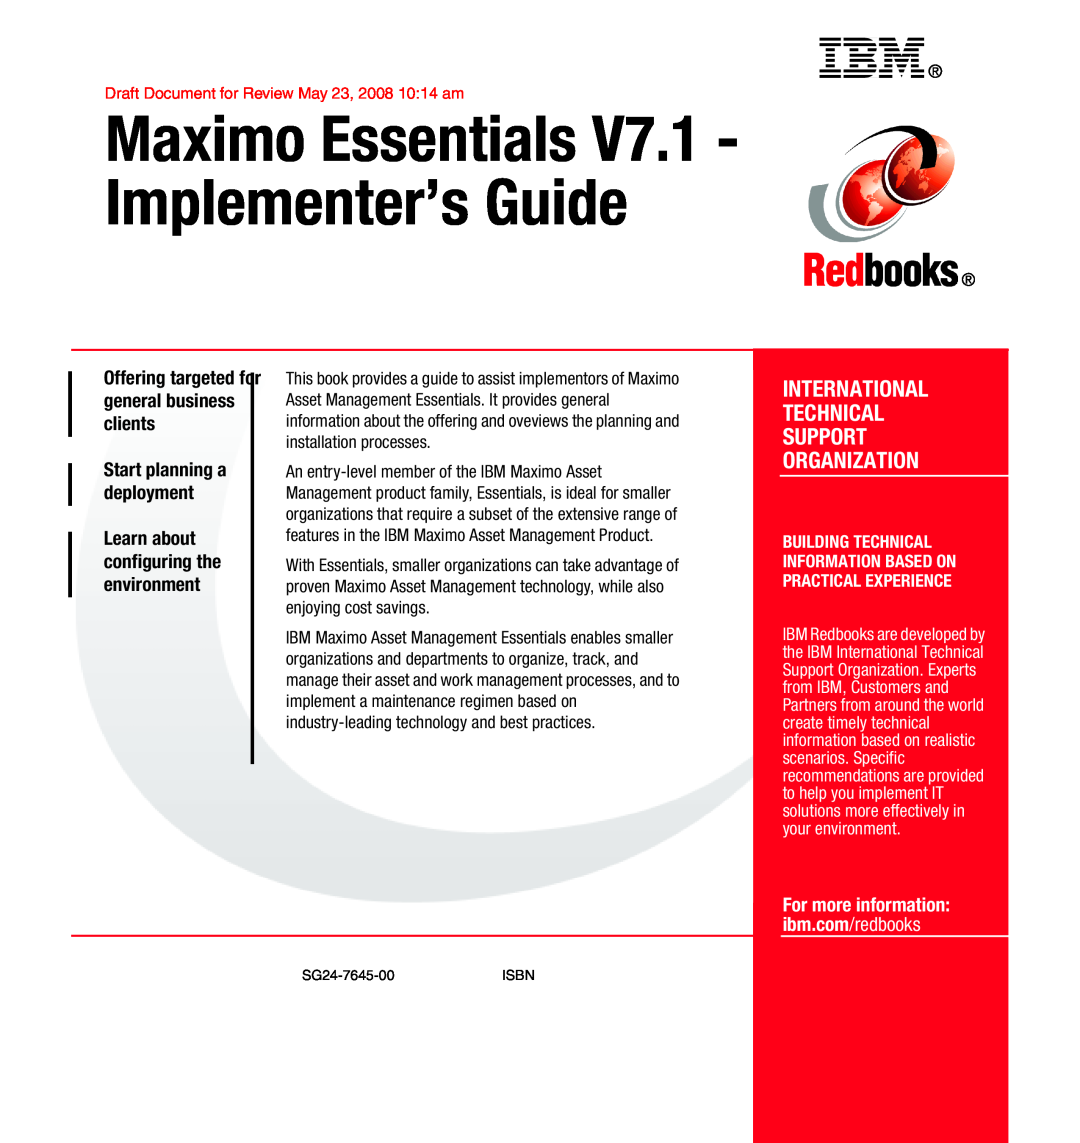 IBM SG24-7645-00 manual Offering targeted for general business clients, Start planning a deployment 